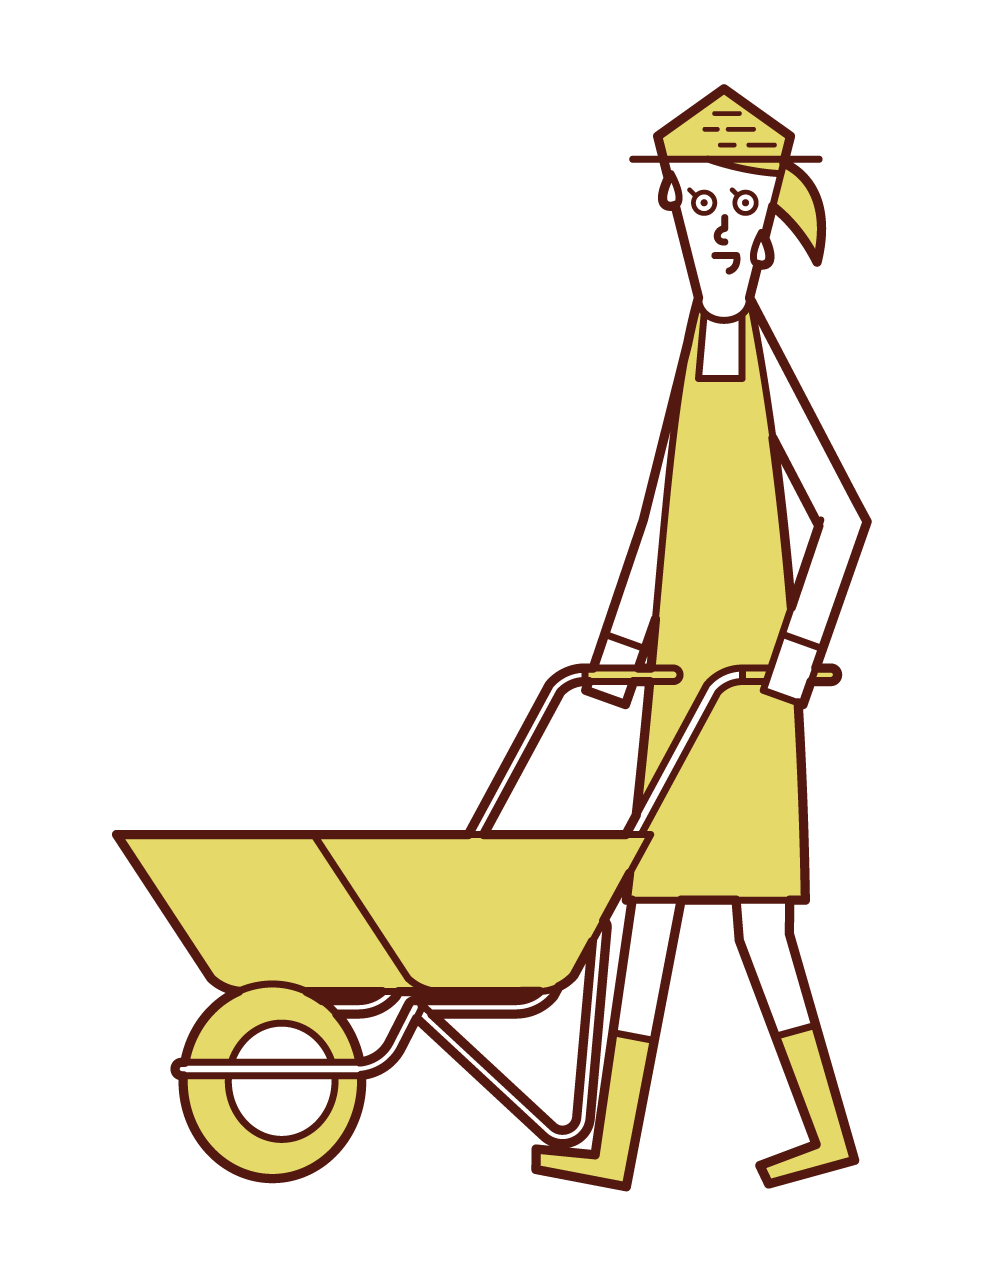 Illustration of a woman using a wheeled unicycle